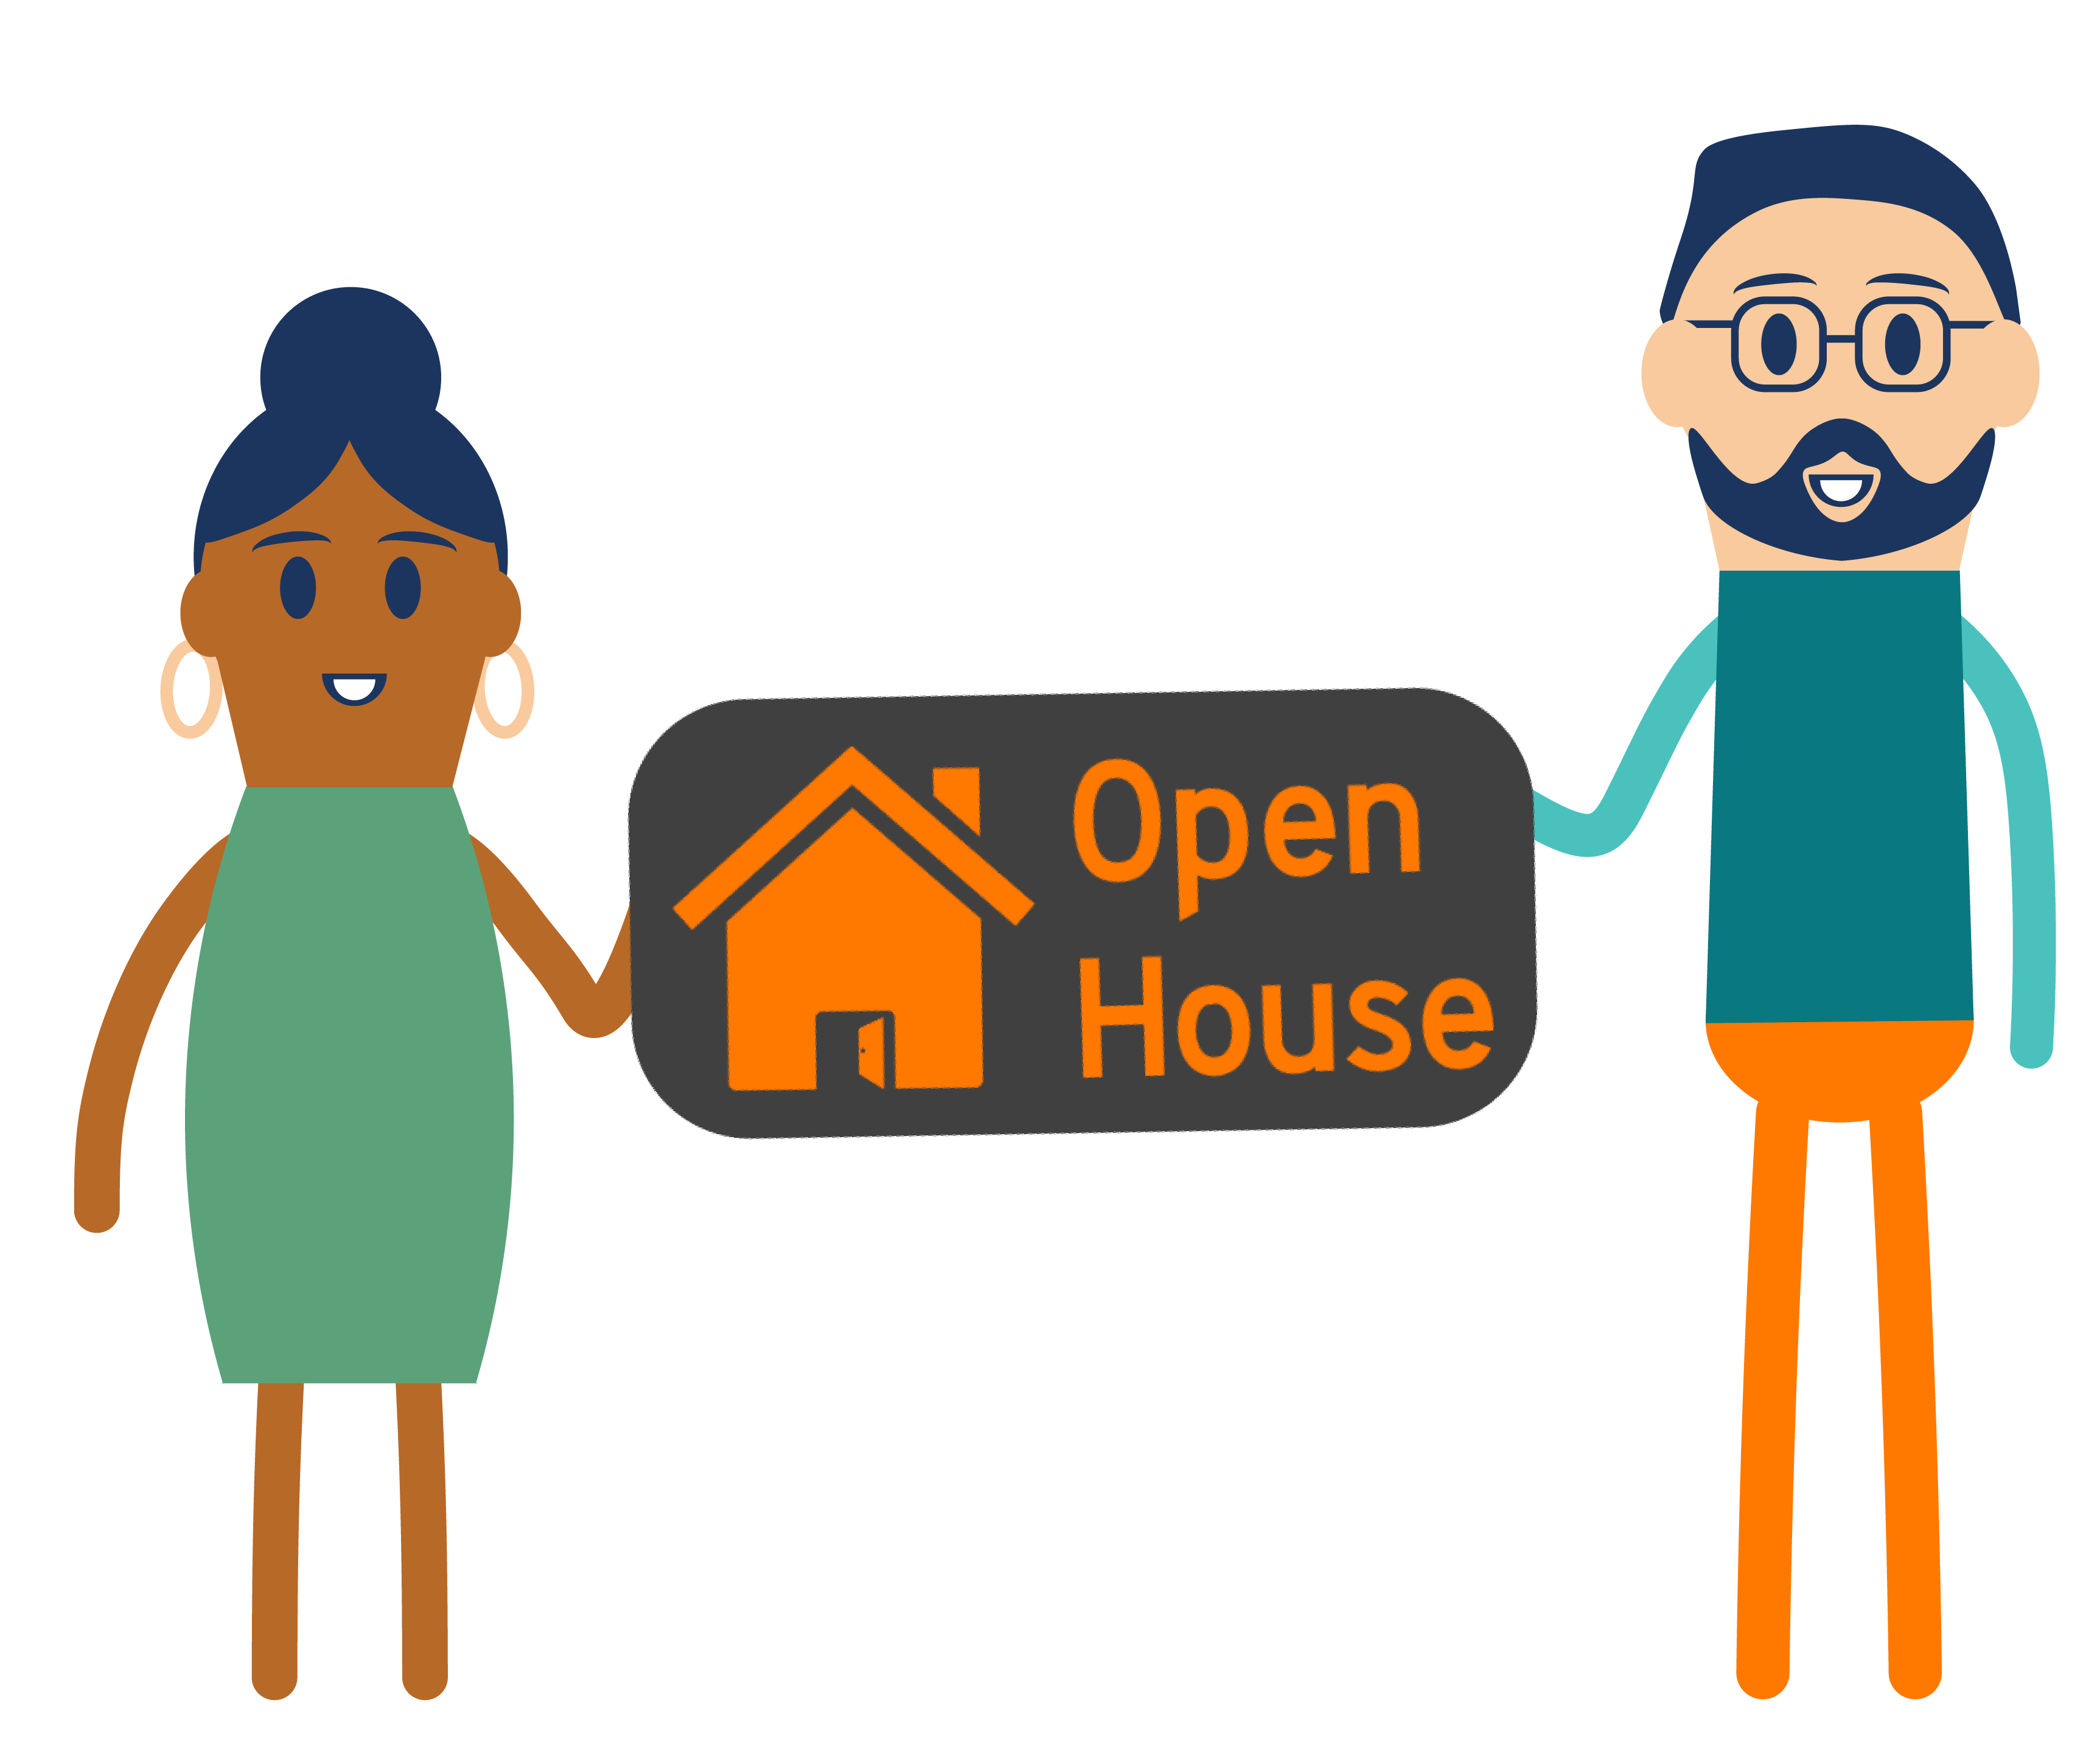 icon showing two people holding an open house sign